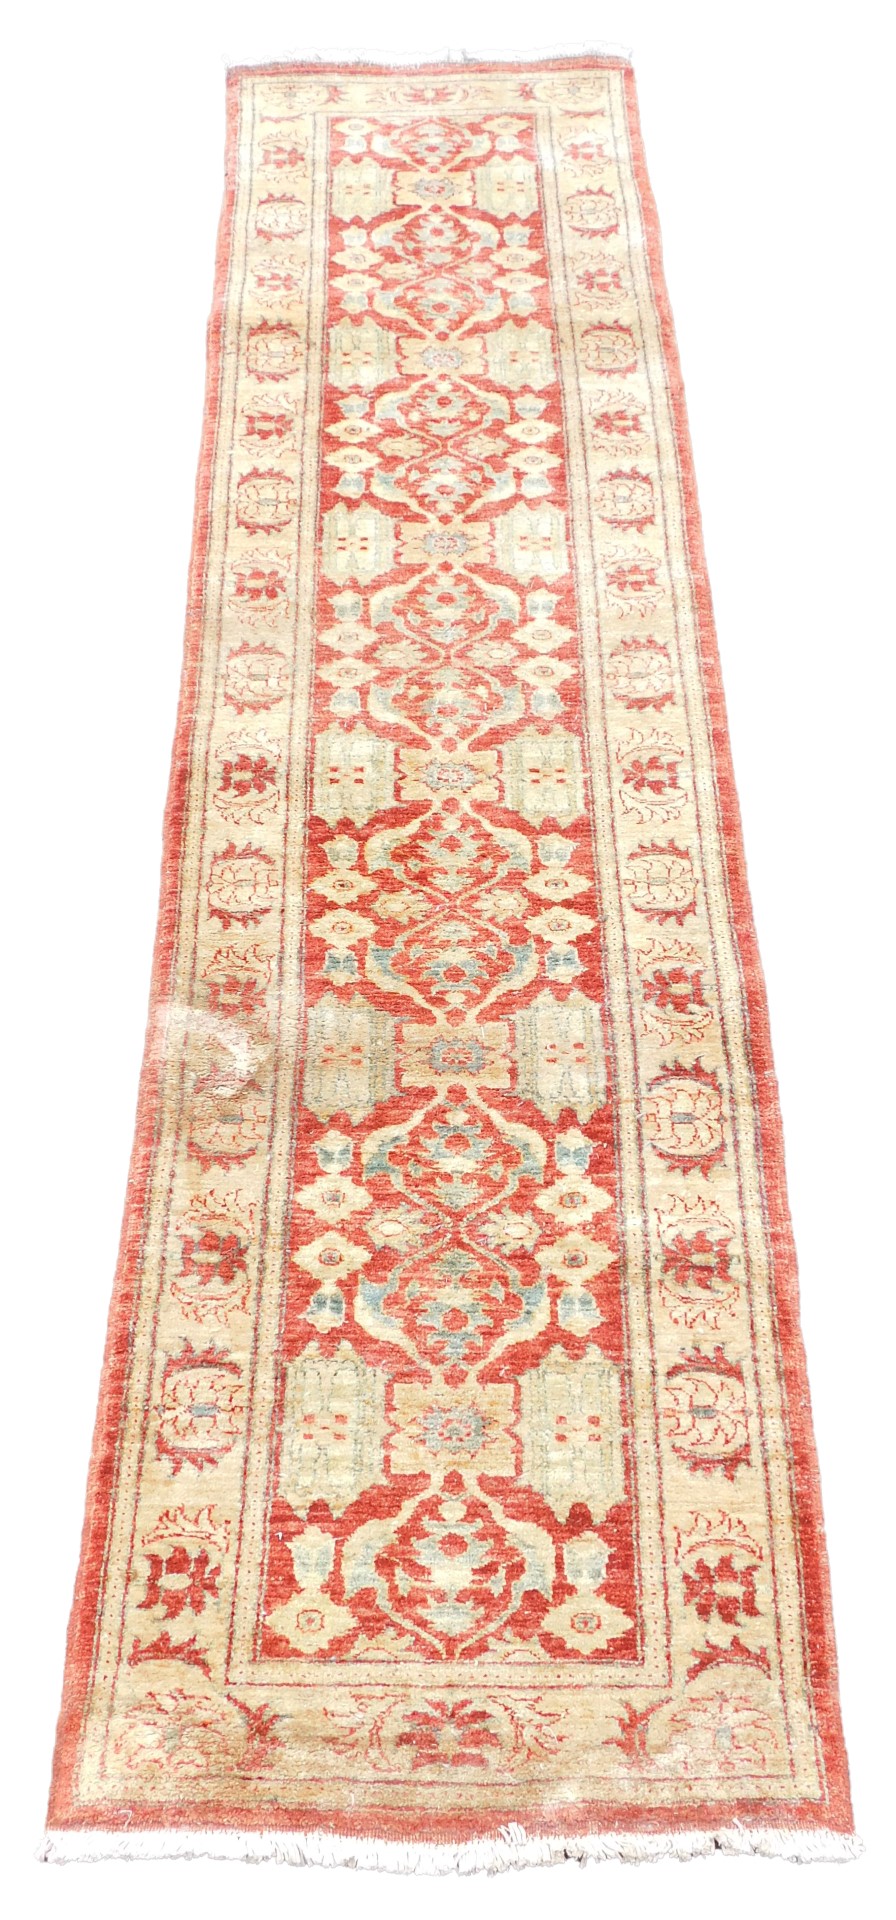 An Afghan red ground runner, decorated with repeating floral medallions and motifs, within repeating